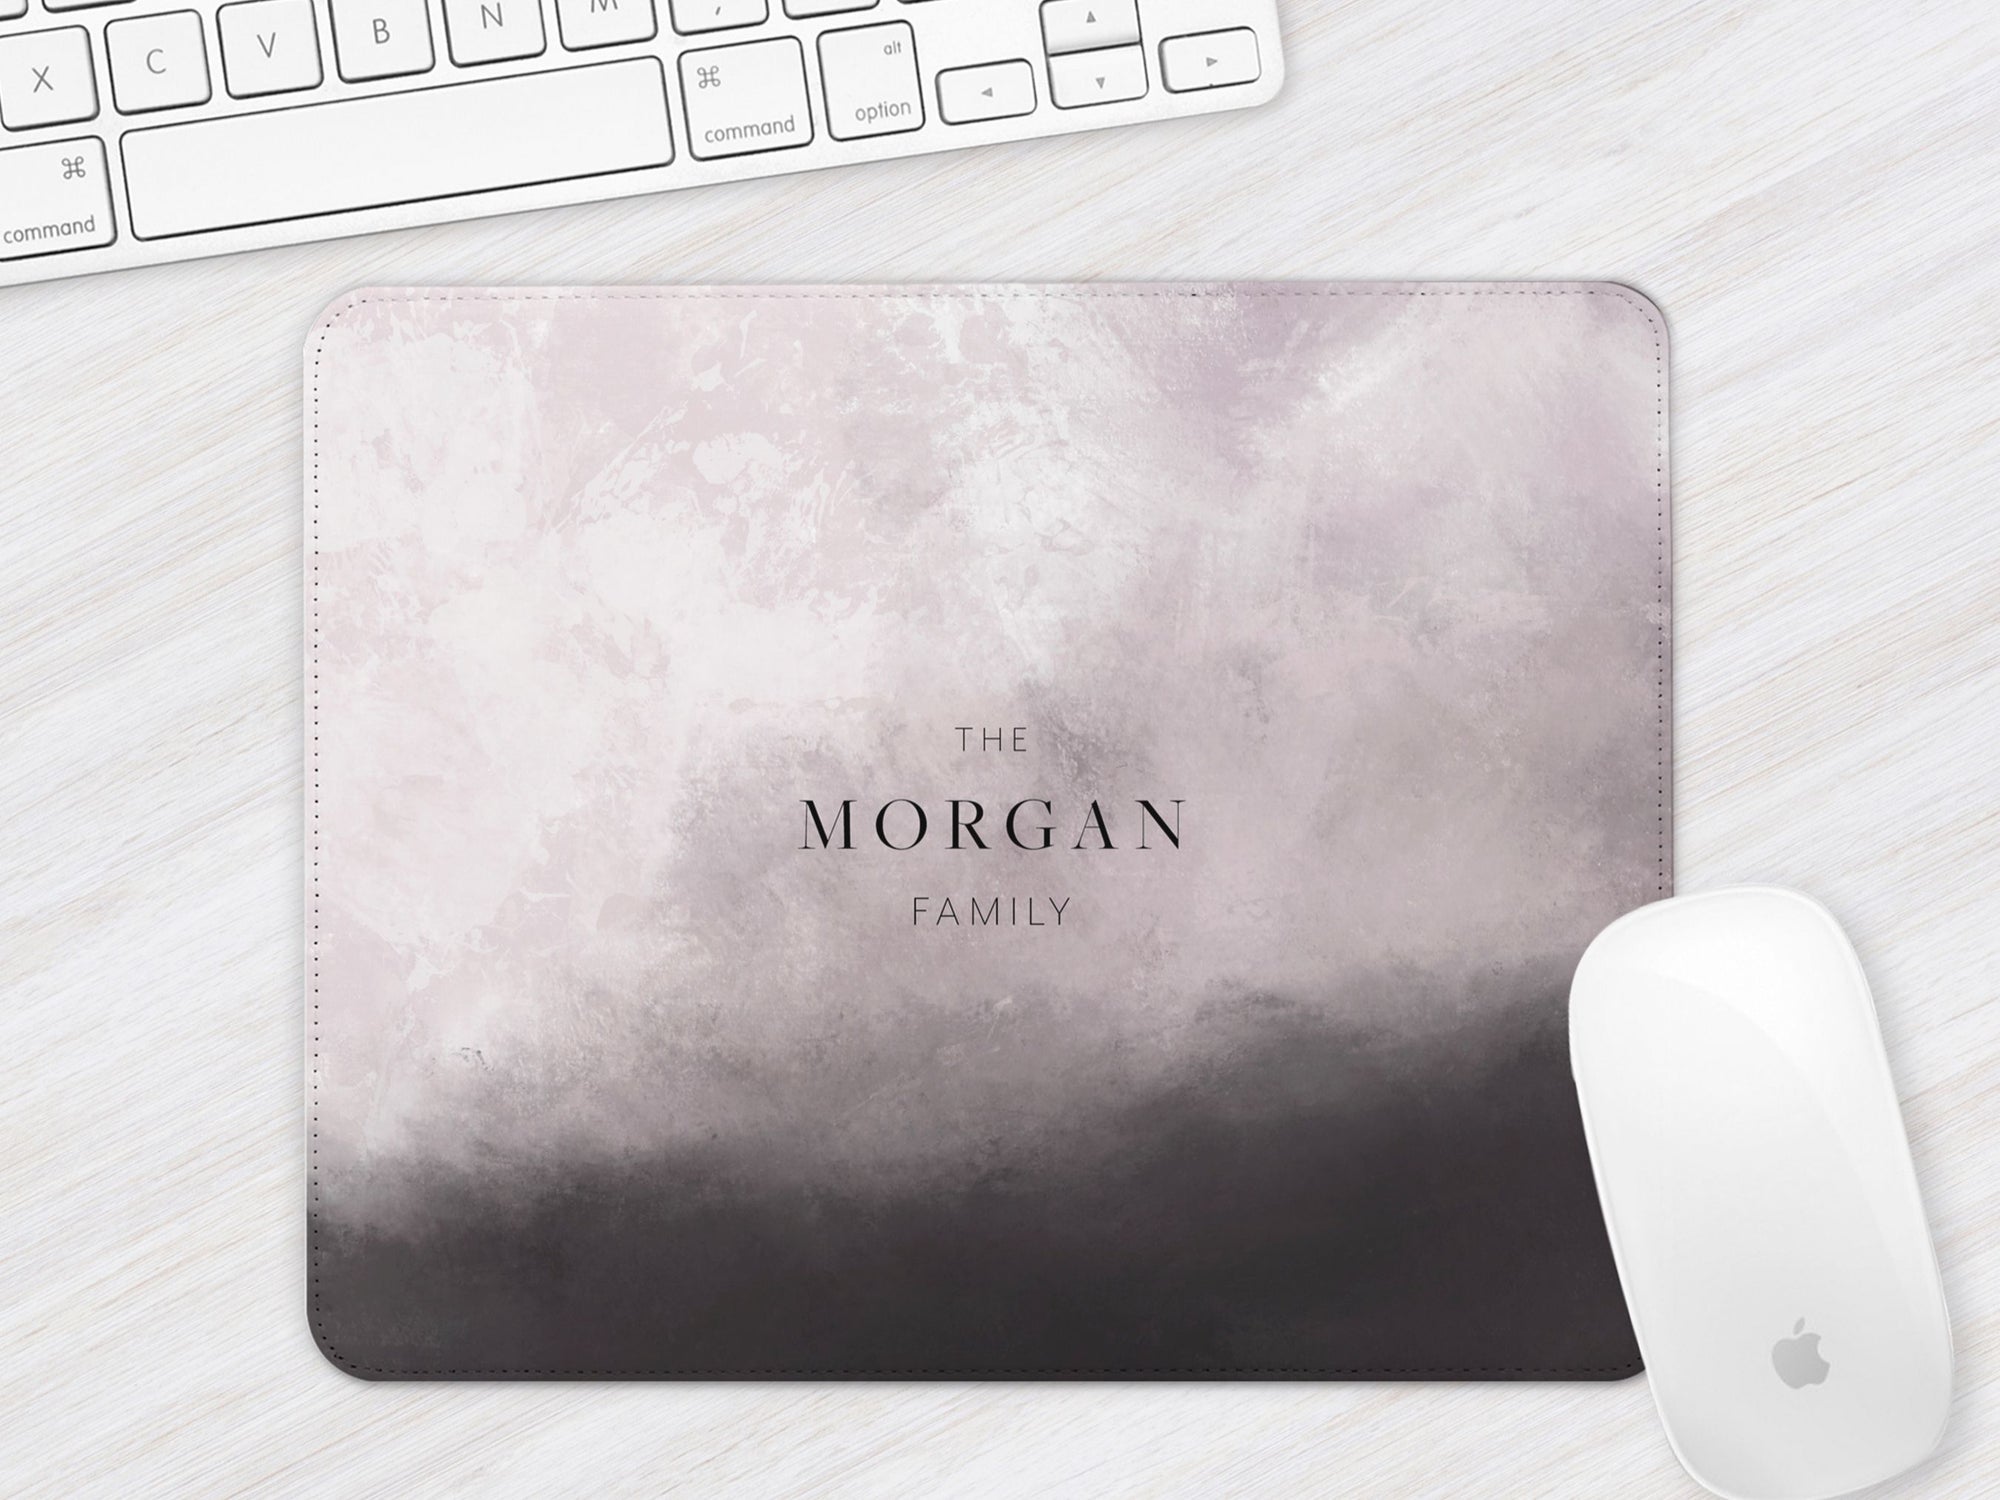 Personalised Mouse Pads & Mouse Mats